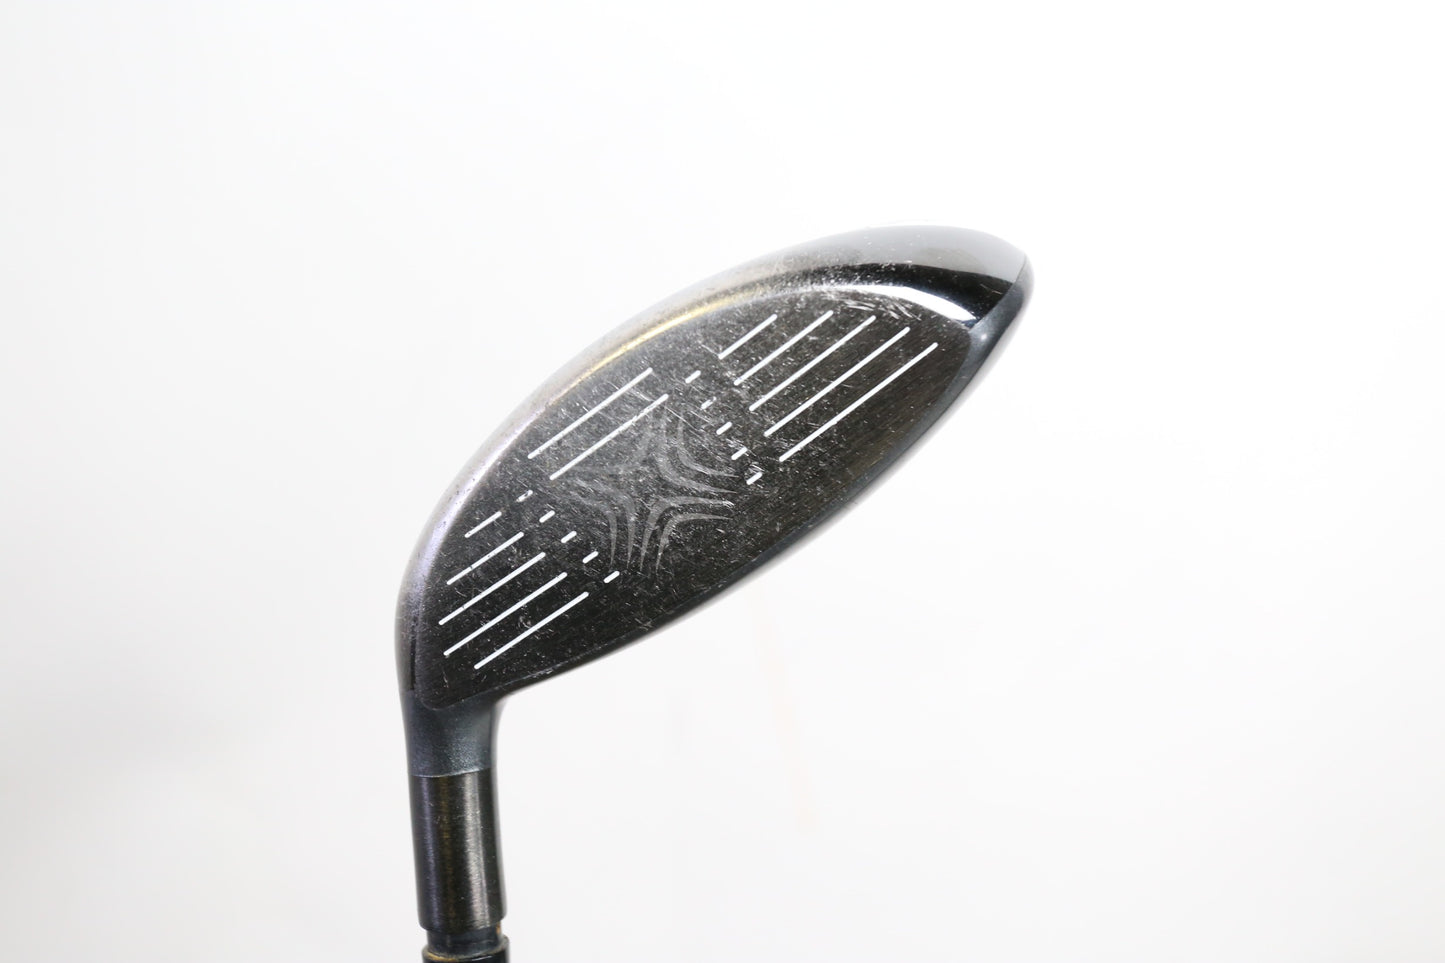 Used Callaway X2 Hot 4-Wood - Right-Handed - 16.5 Degrees - Ladies Flex-Next Round